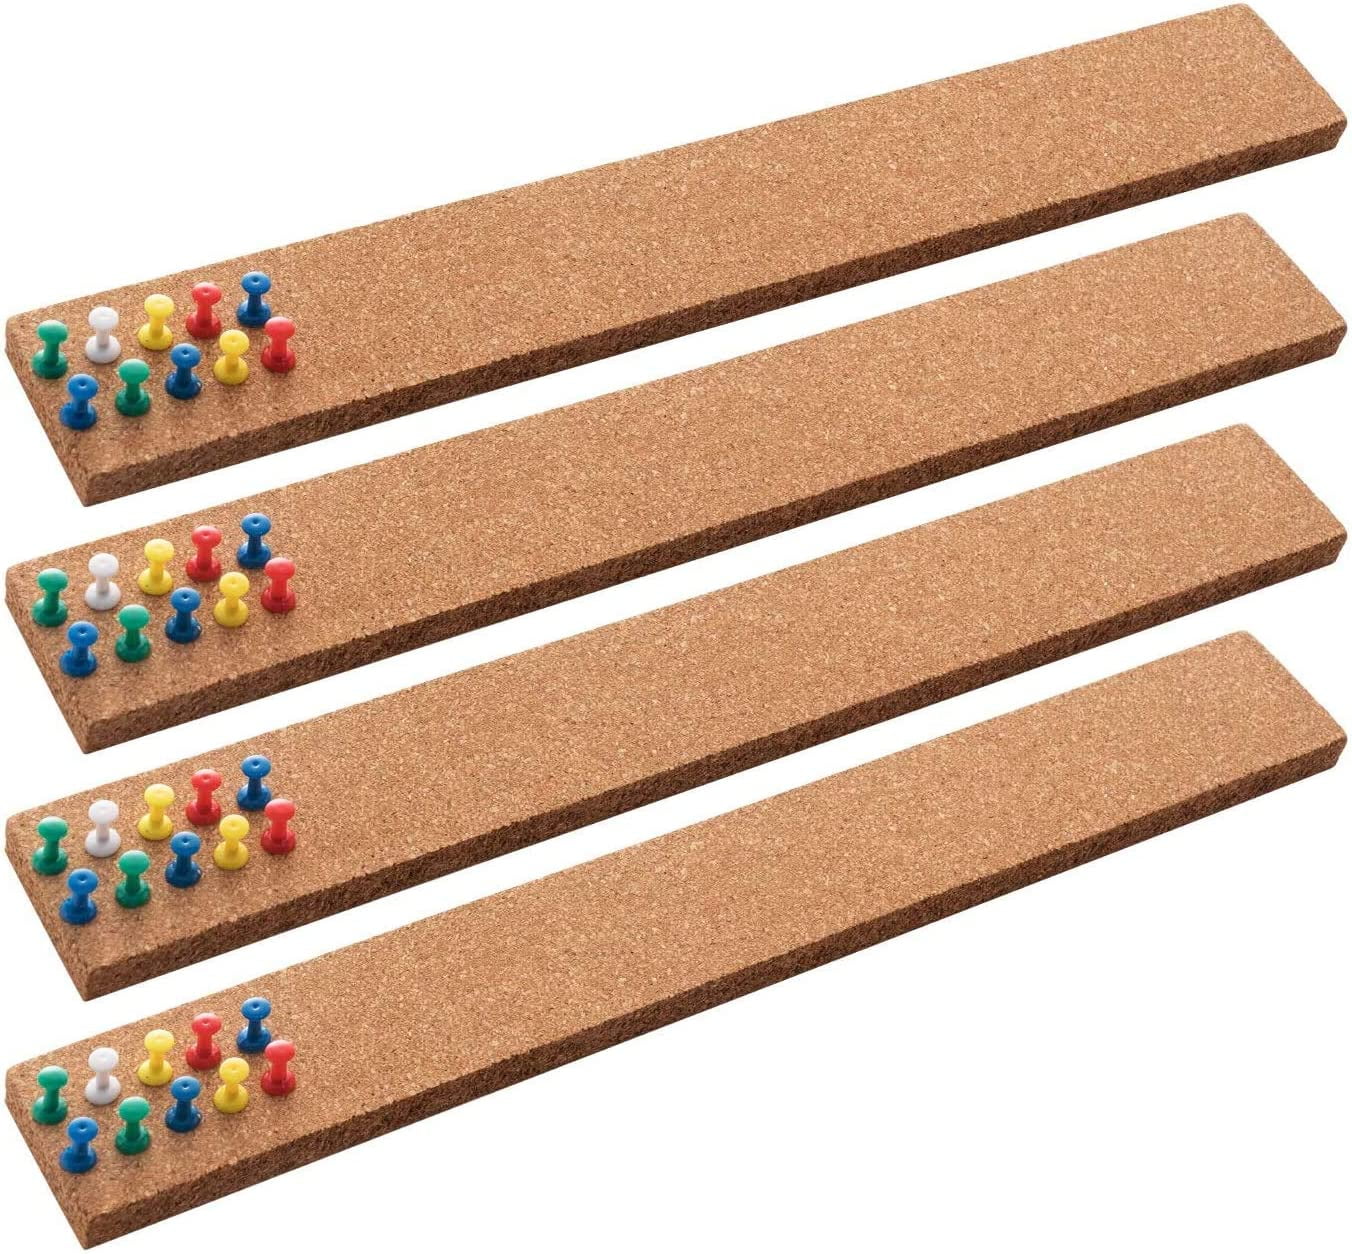 $1/mo - Finance Aodaer 3 Pack Cork Board Strips Thick Multi Purpose  Self-Adhesive Cork Strips with 40 Pieces Push Pins for Classroom Office and  Home